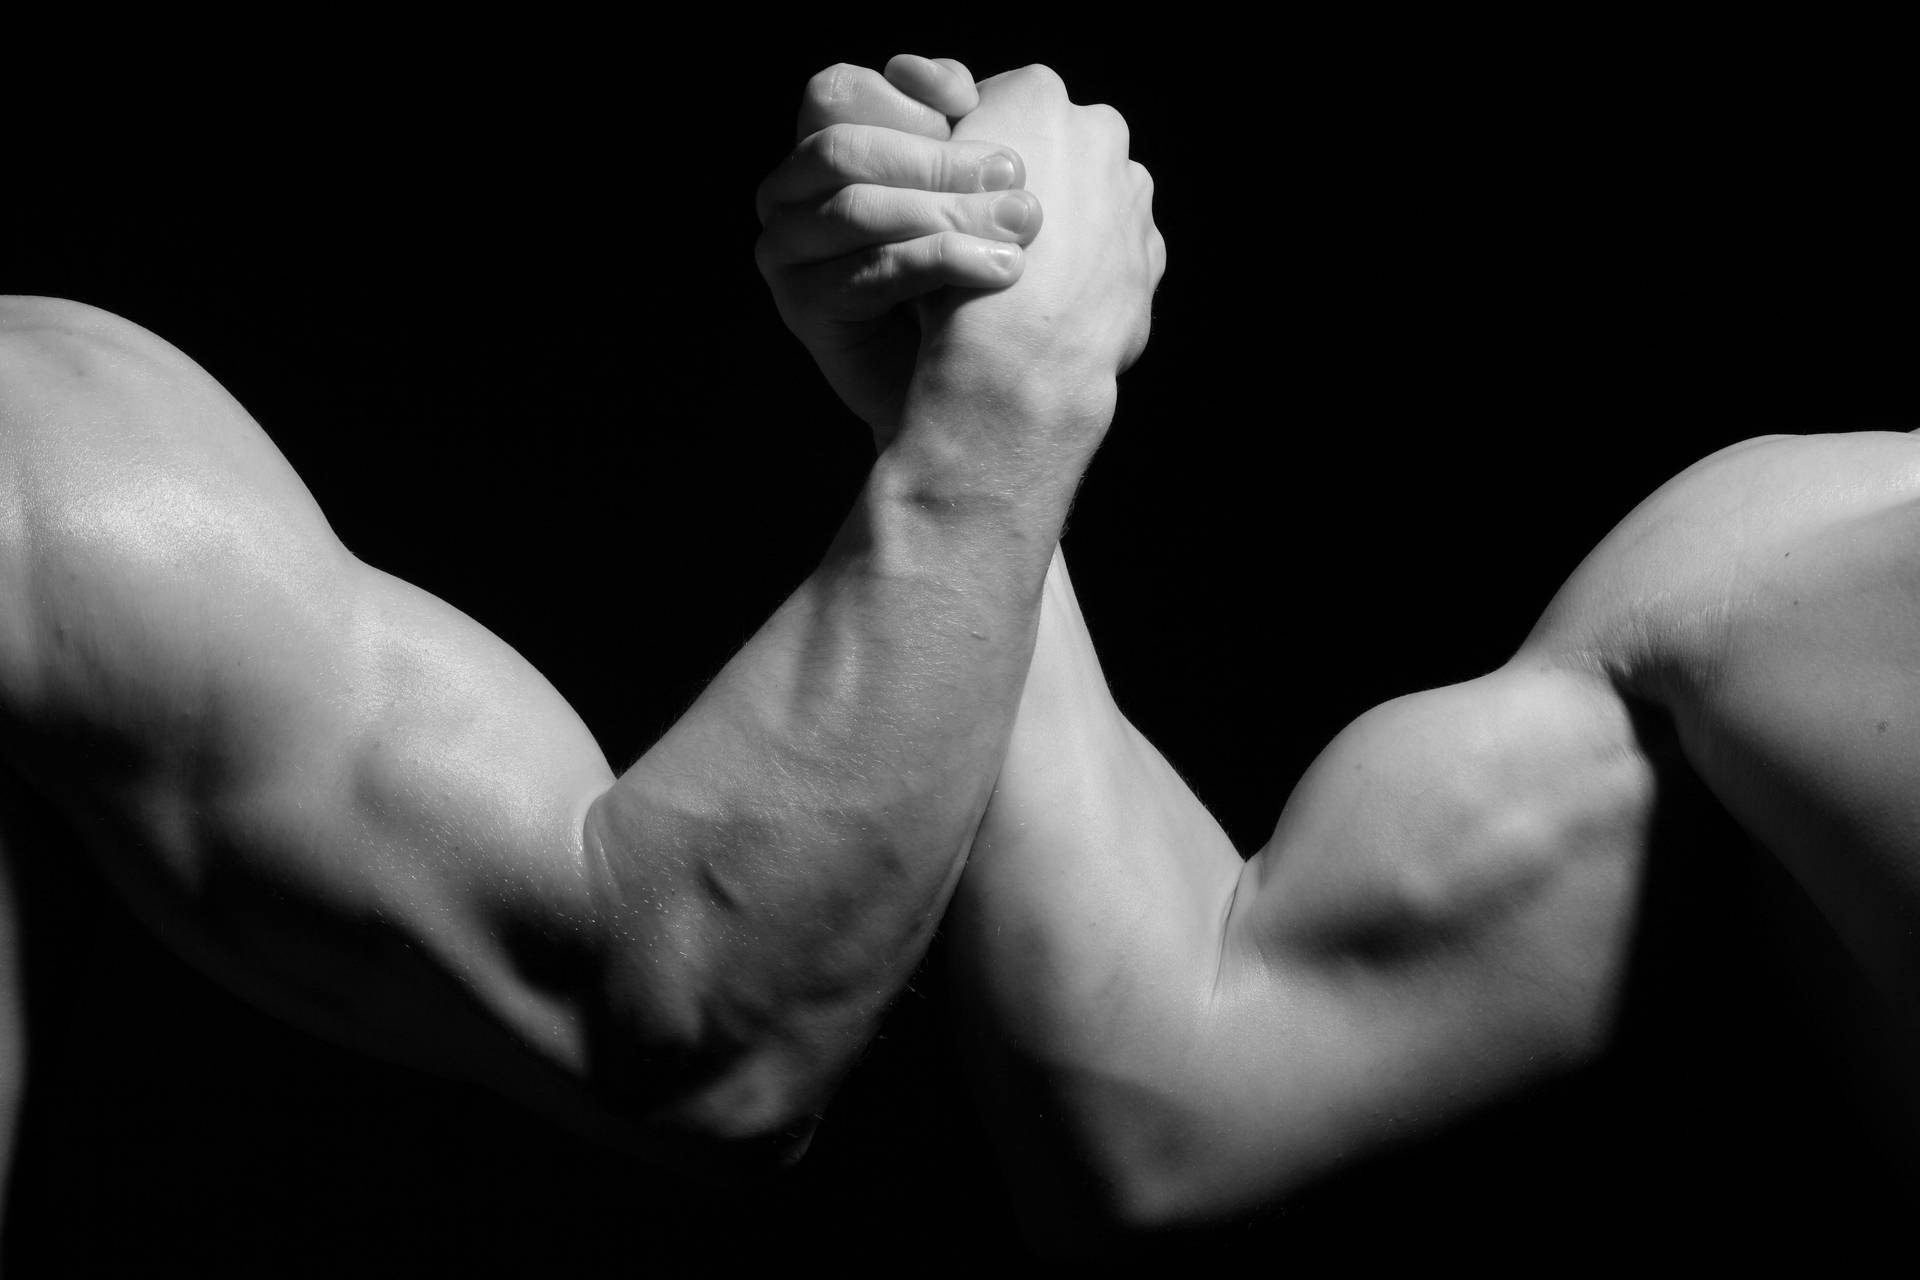 Leave it all on the line in Arm Wrestling Wallpaper